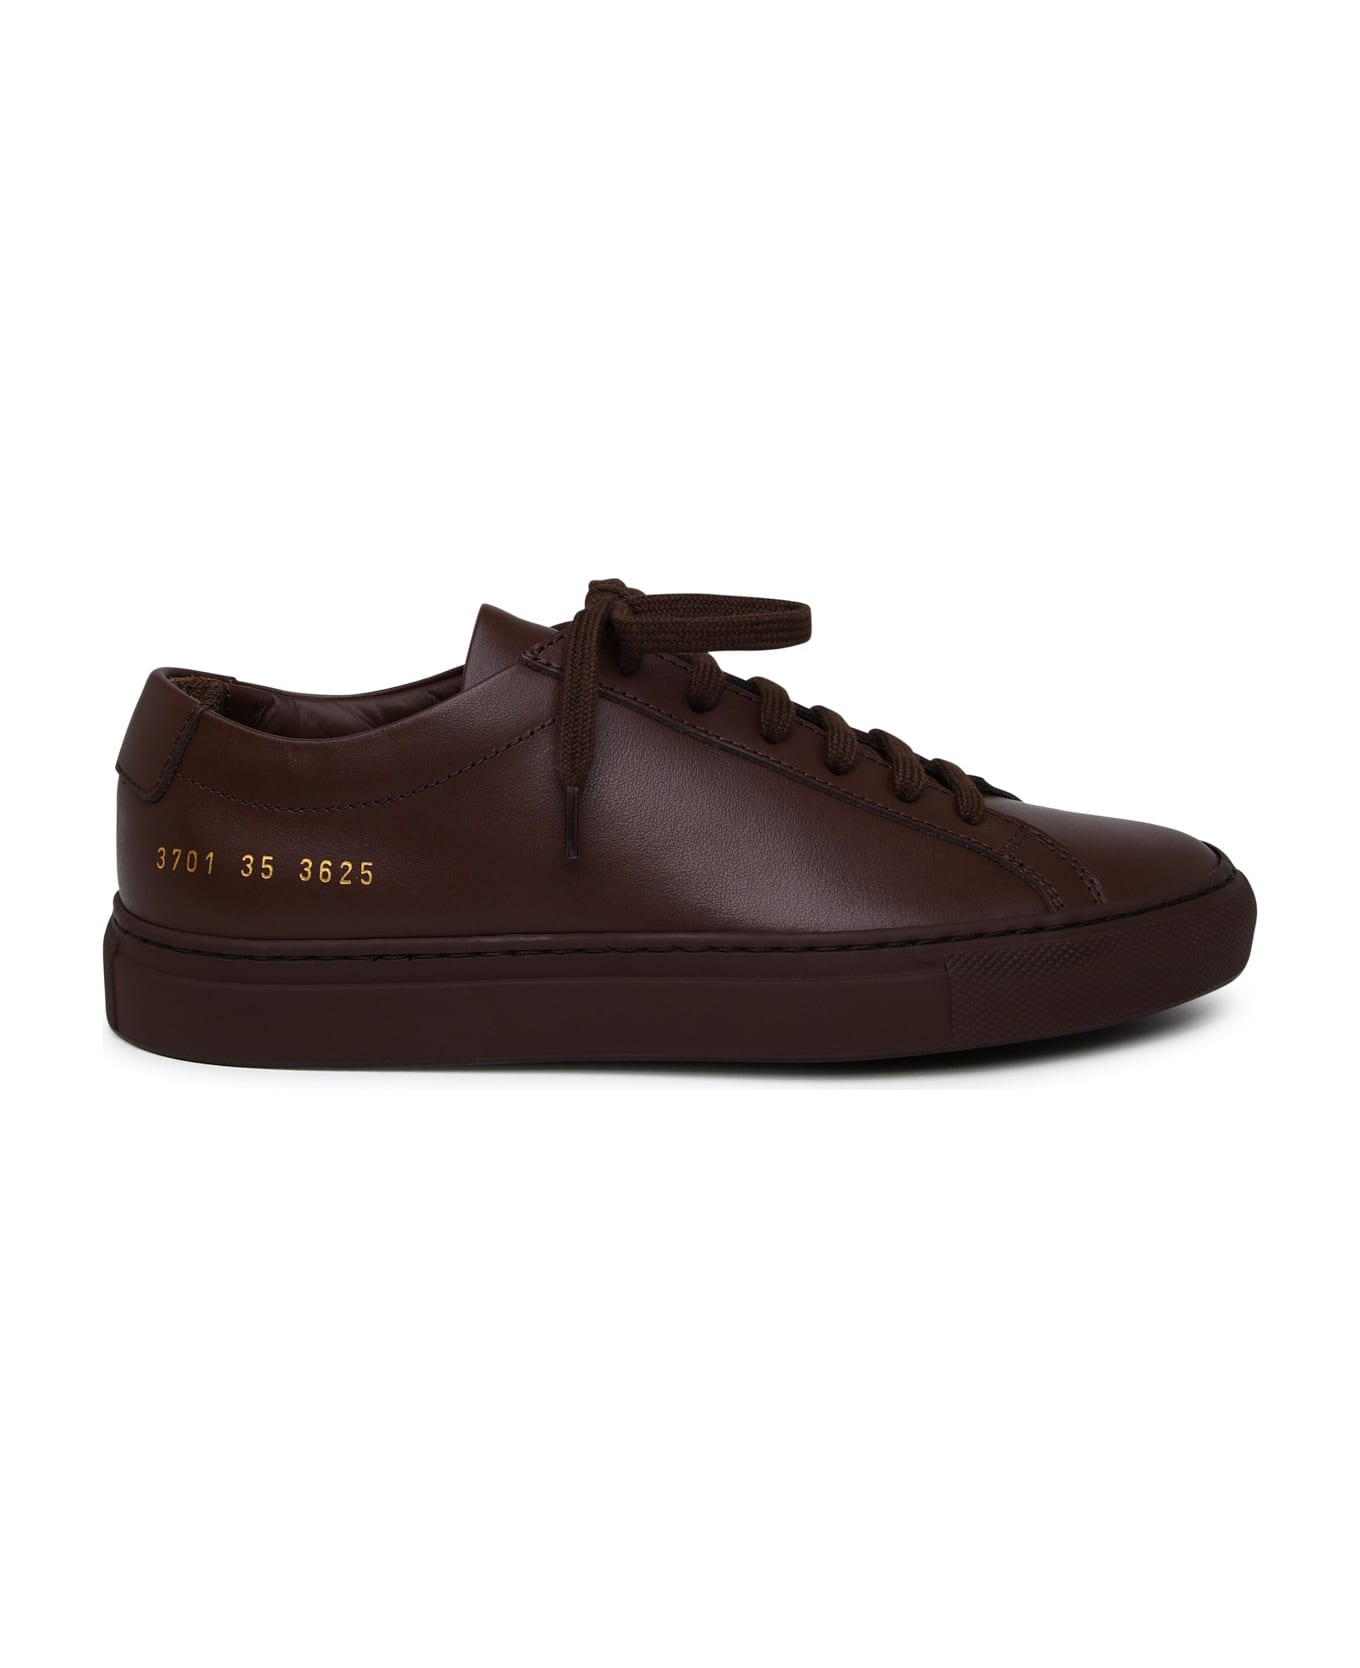 Common Projects Achilles Brown Leather Sneakers - Brown スニーカー